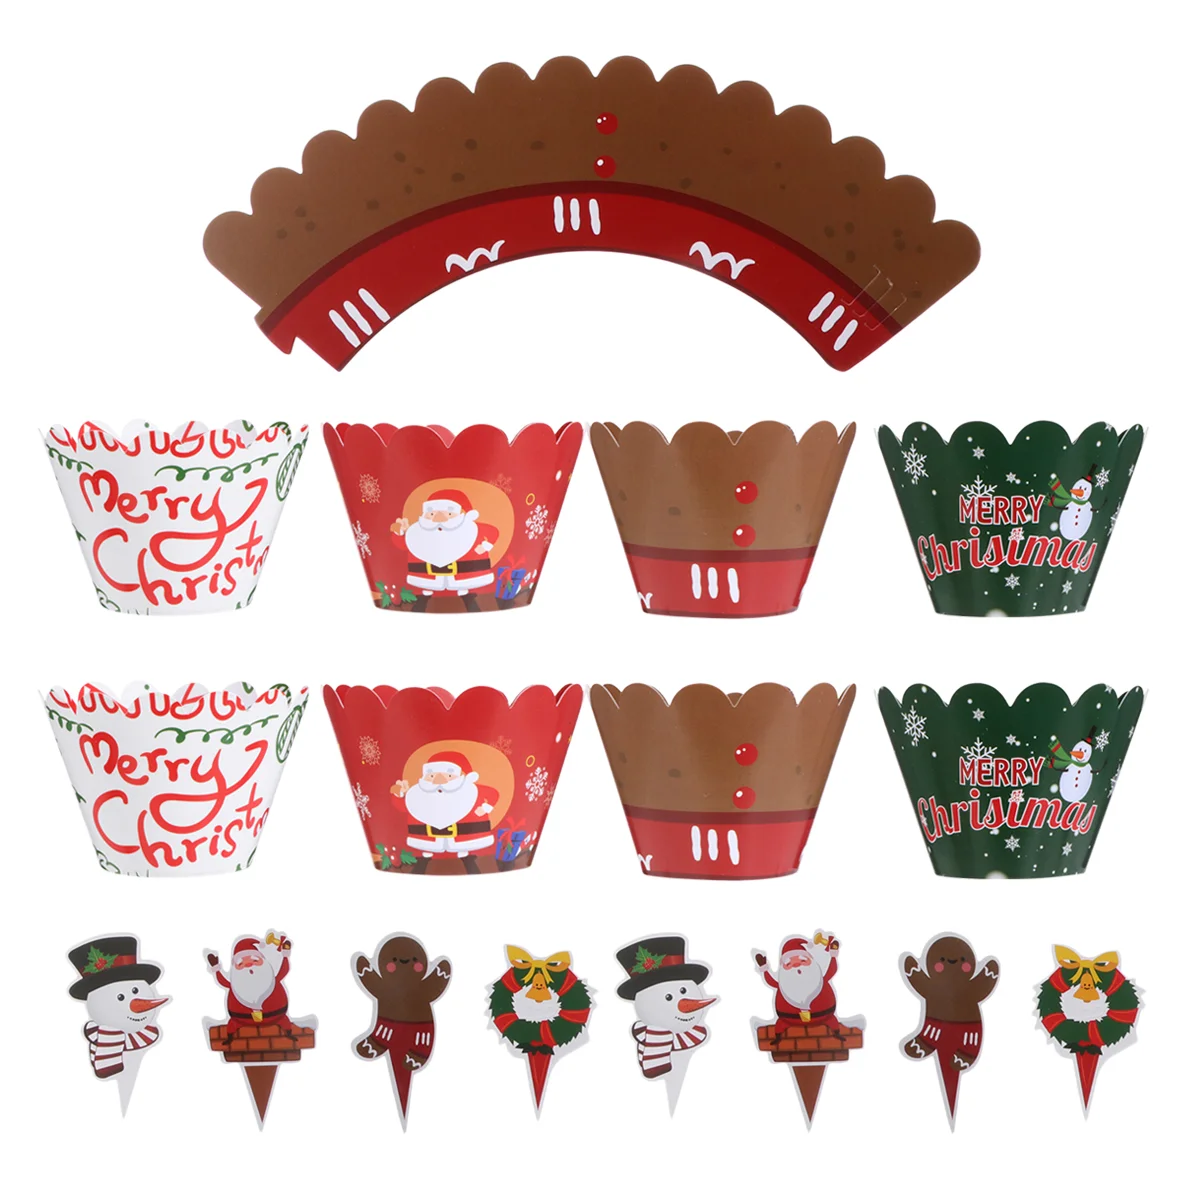 

Christmas Cupcake Toppers Wrappersdessert Cake Decorations Picks Xmas Topper Holders Party Edible Merry Festive Cups Baking